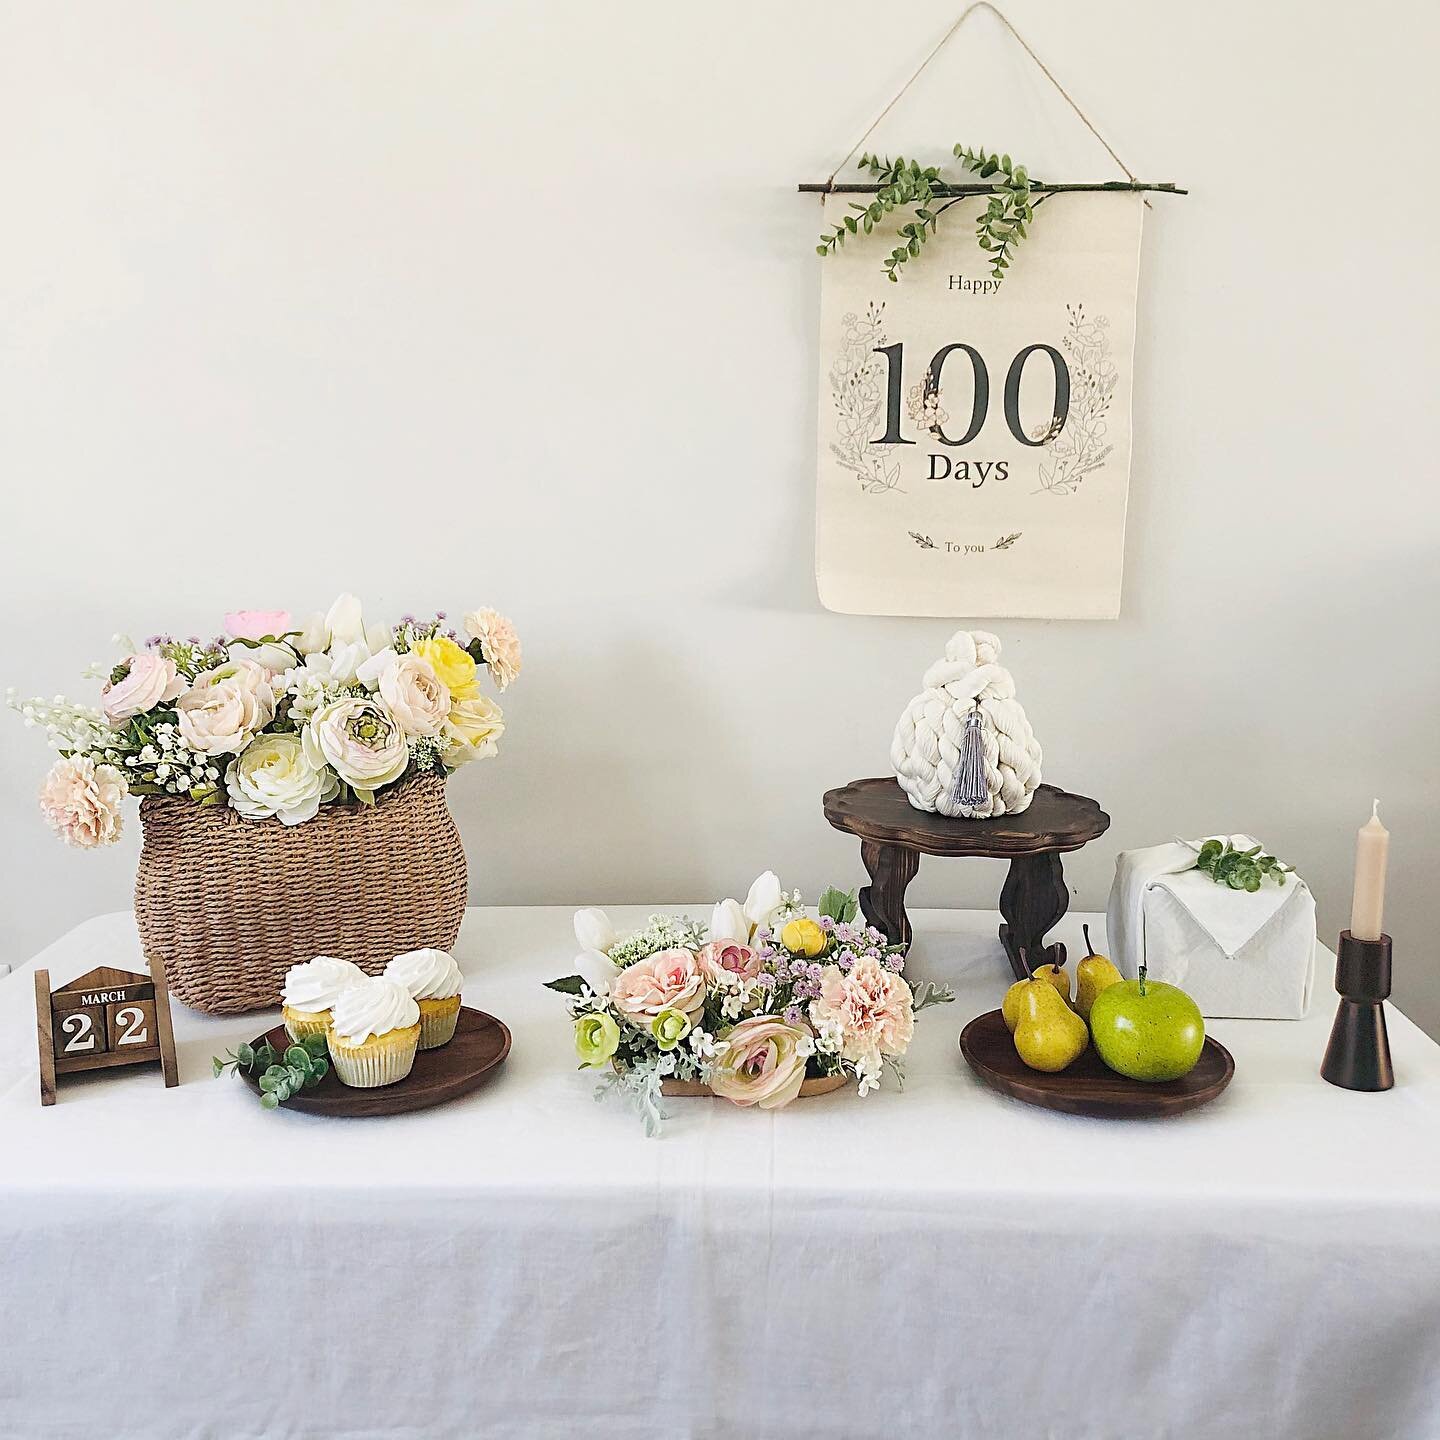 .
.
New Mini Table: Sweet Blooming

Available for both 100 day and 1st birthday
Made to fit in a 4ft table 
Filled with beautiful premium silk flowers
Available for shipping! 📦

헬로의 새로운 미니 테이블 스윗블루밍 테이블을 소개합니다 🌸
보